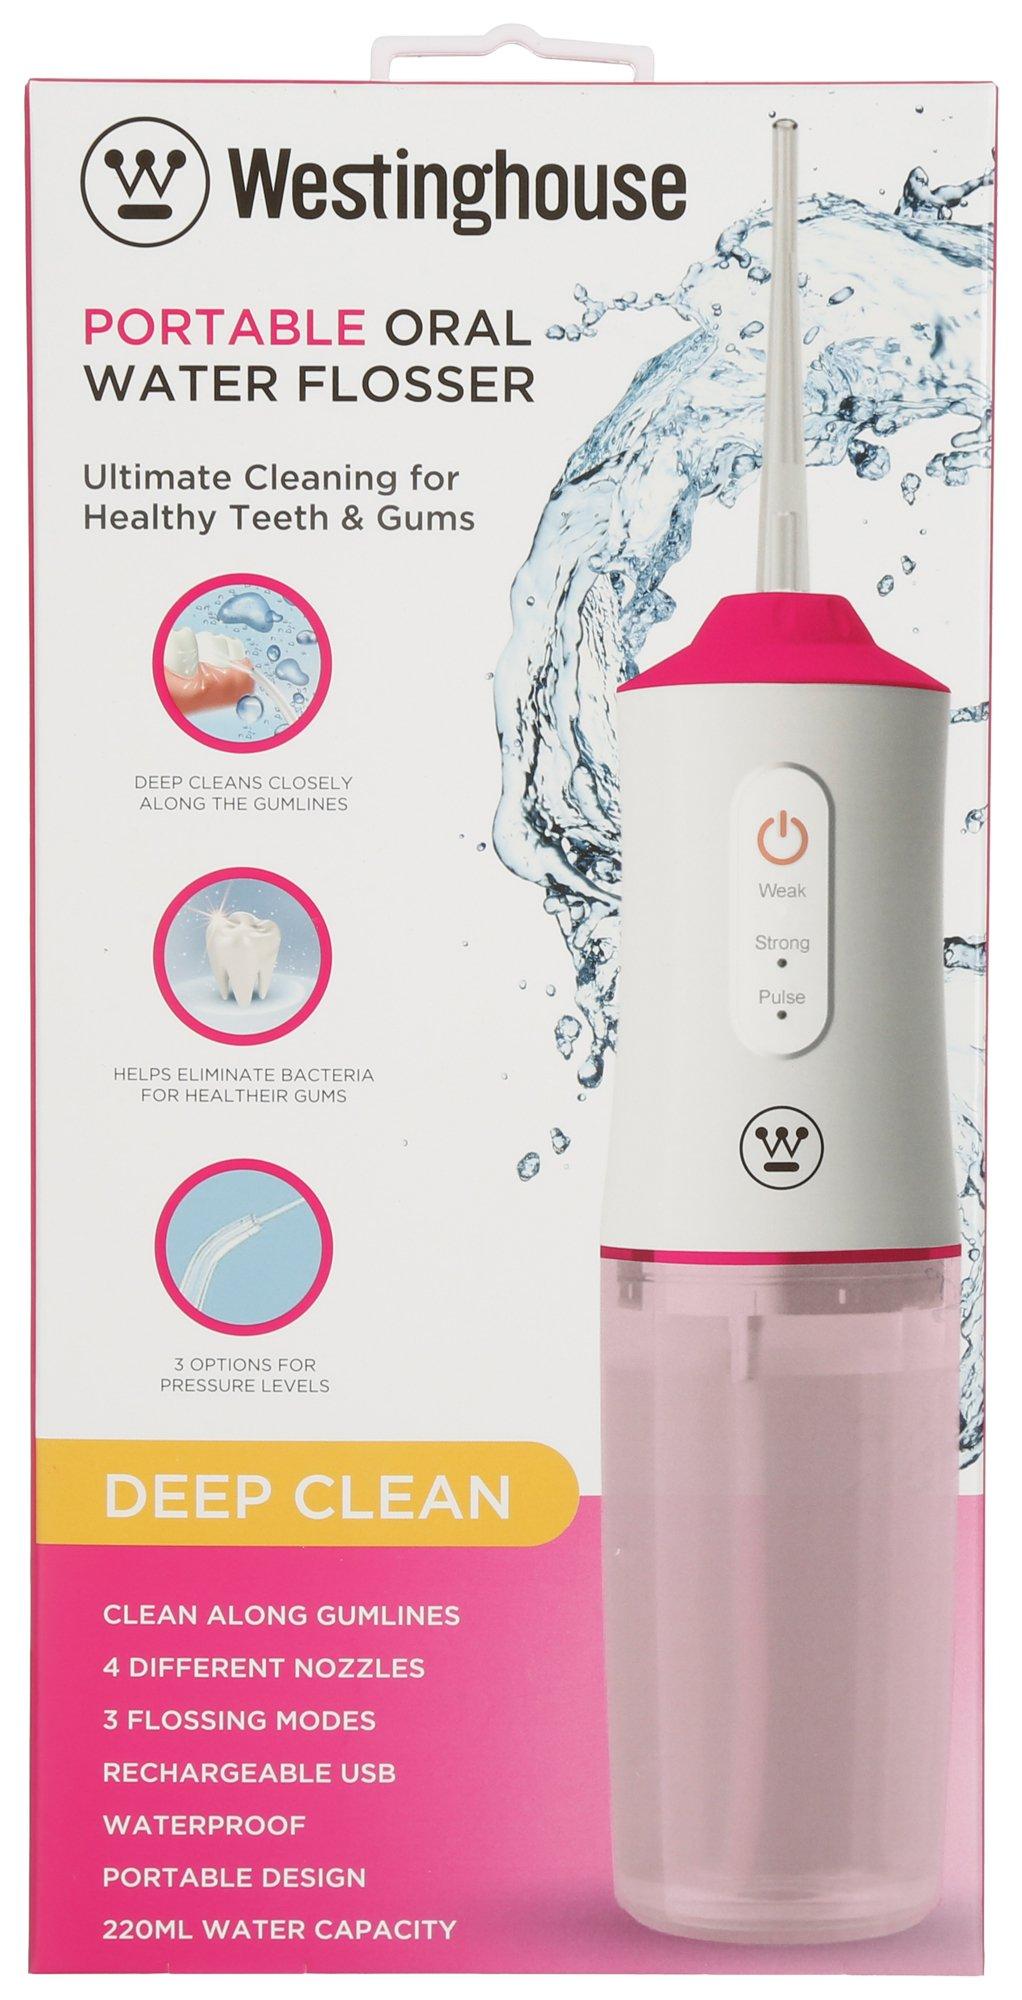 Portable Oral Water Flosser